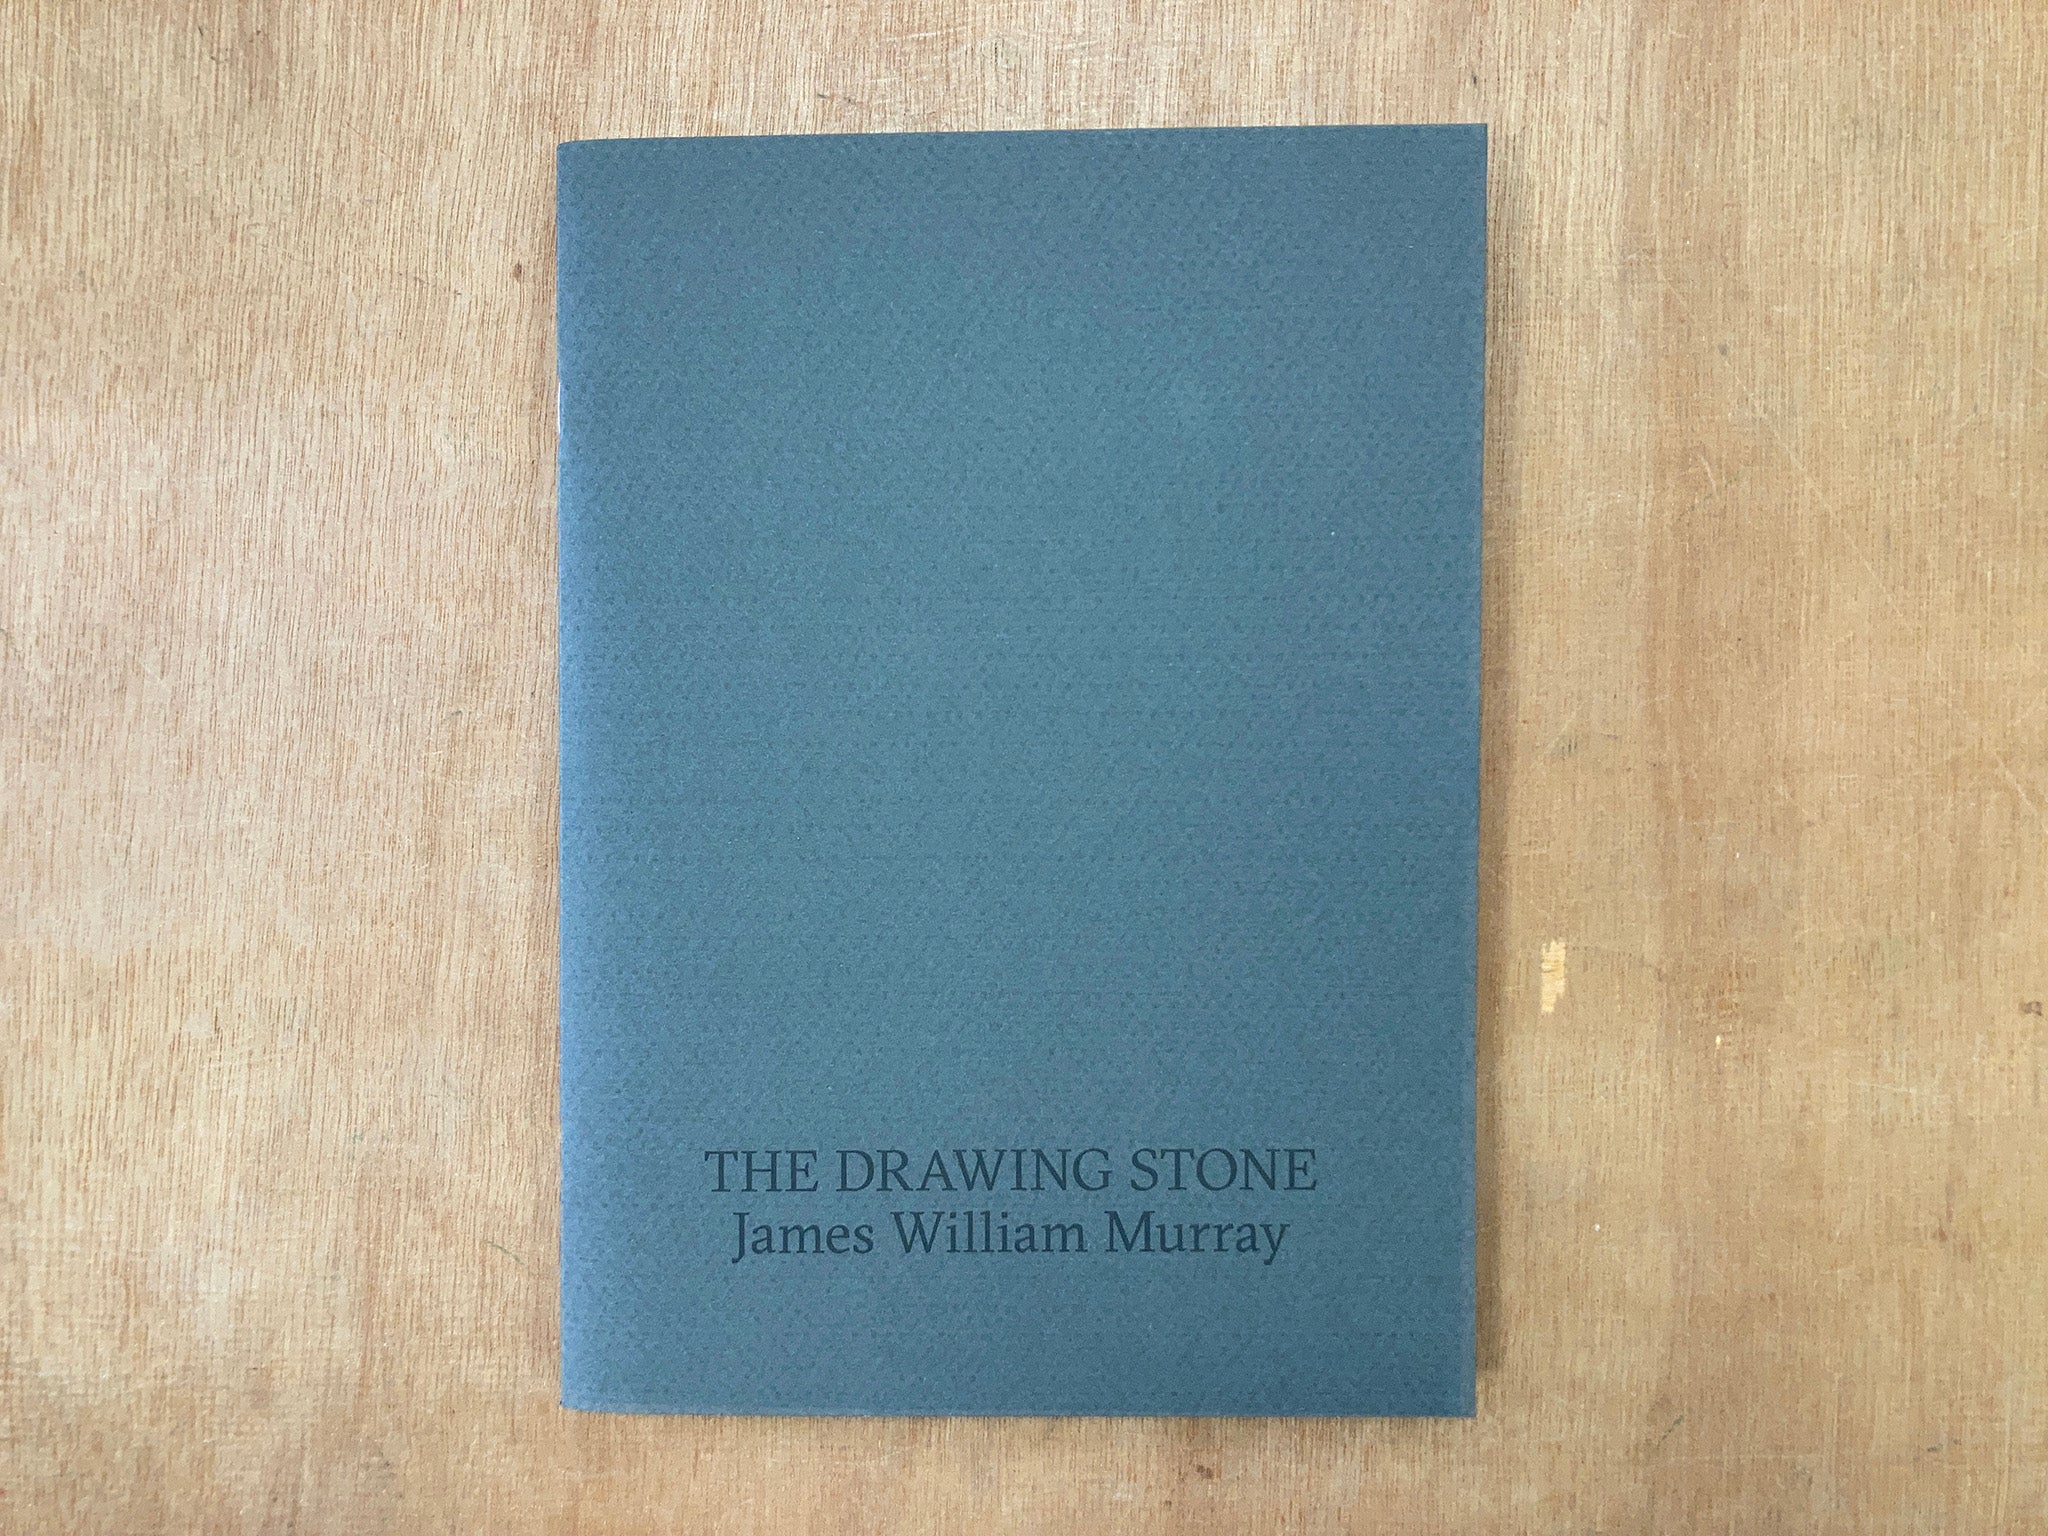 THE DRAWING STONE by James William Murray